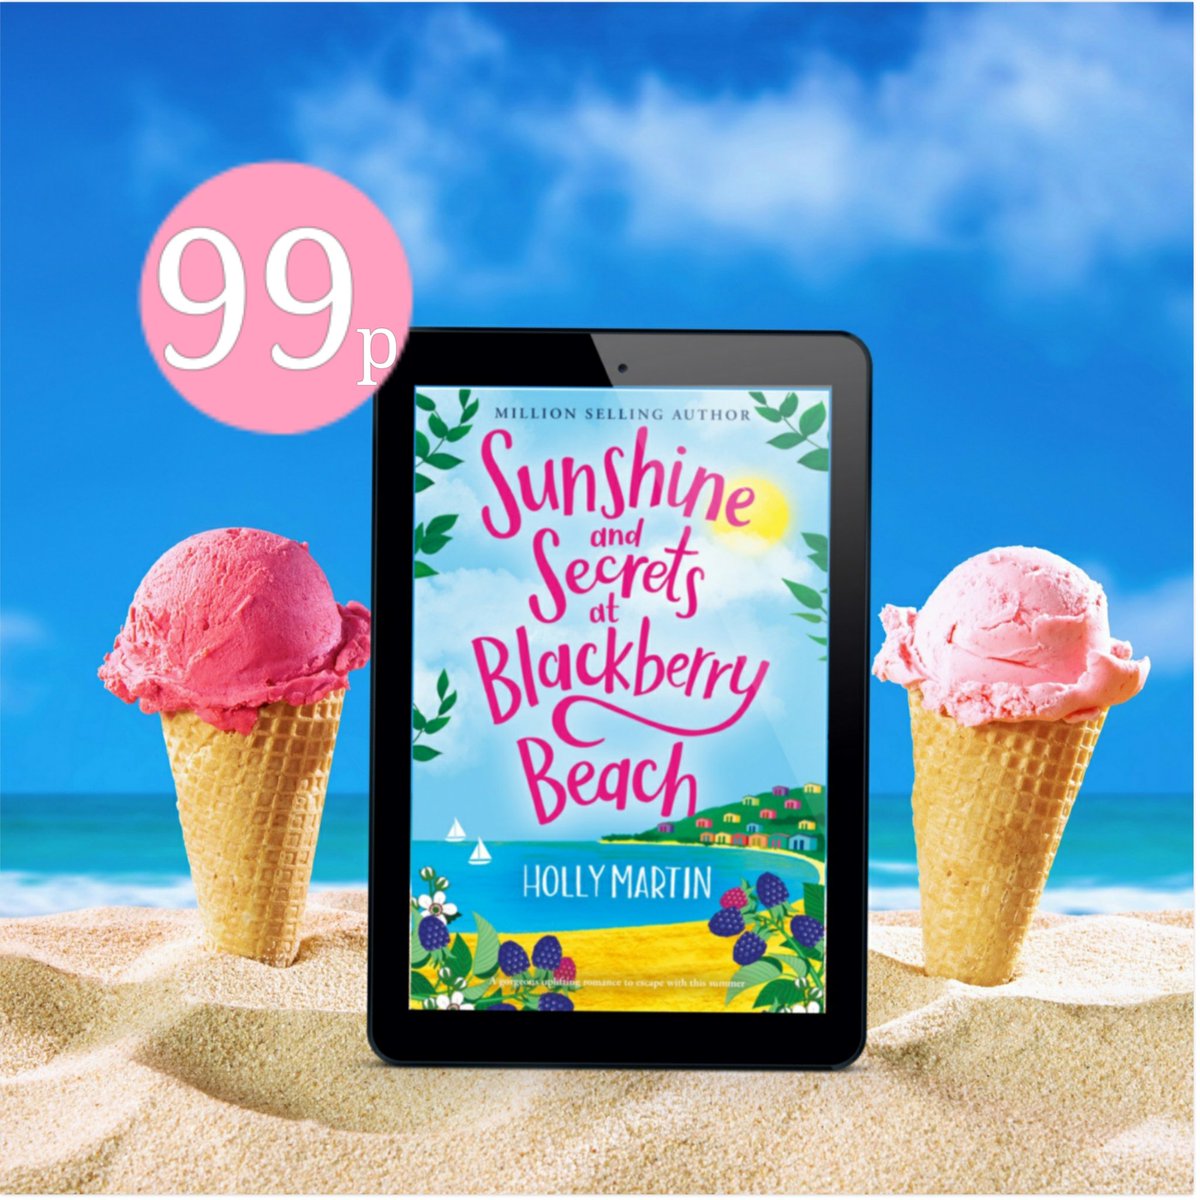 So happy to see Sunshine and Secrets at Blackberry Beach in the top 100 today, currently sitting at no.79 in the whole of the UK. It's 99p right now, but only for a few more hours. Grab yourself a delicious, sunshiney bargain today geni.us/BlackberryBeach @lblaUK